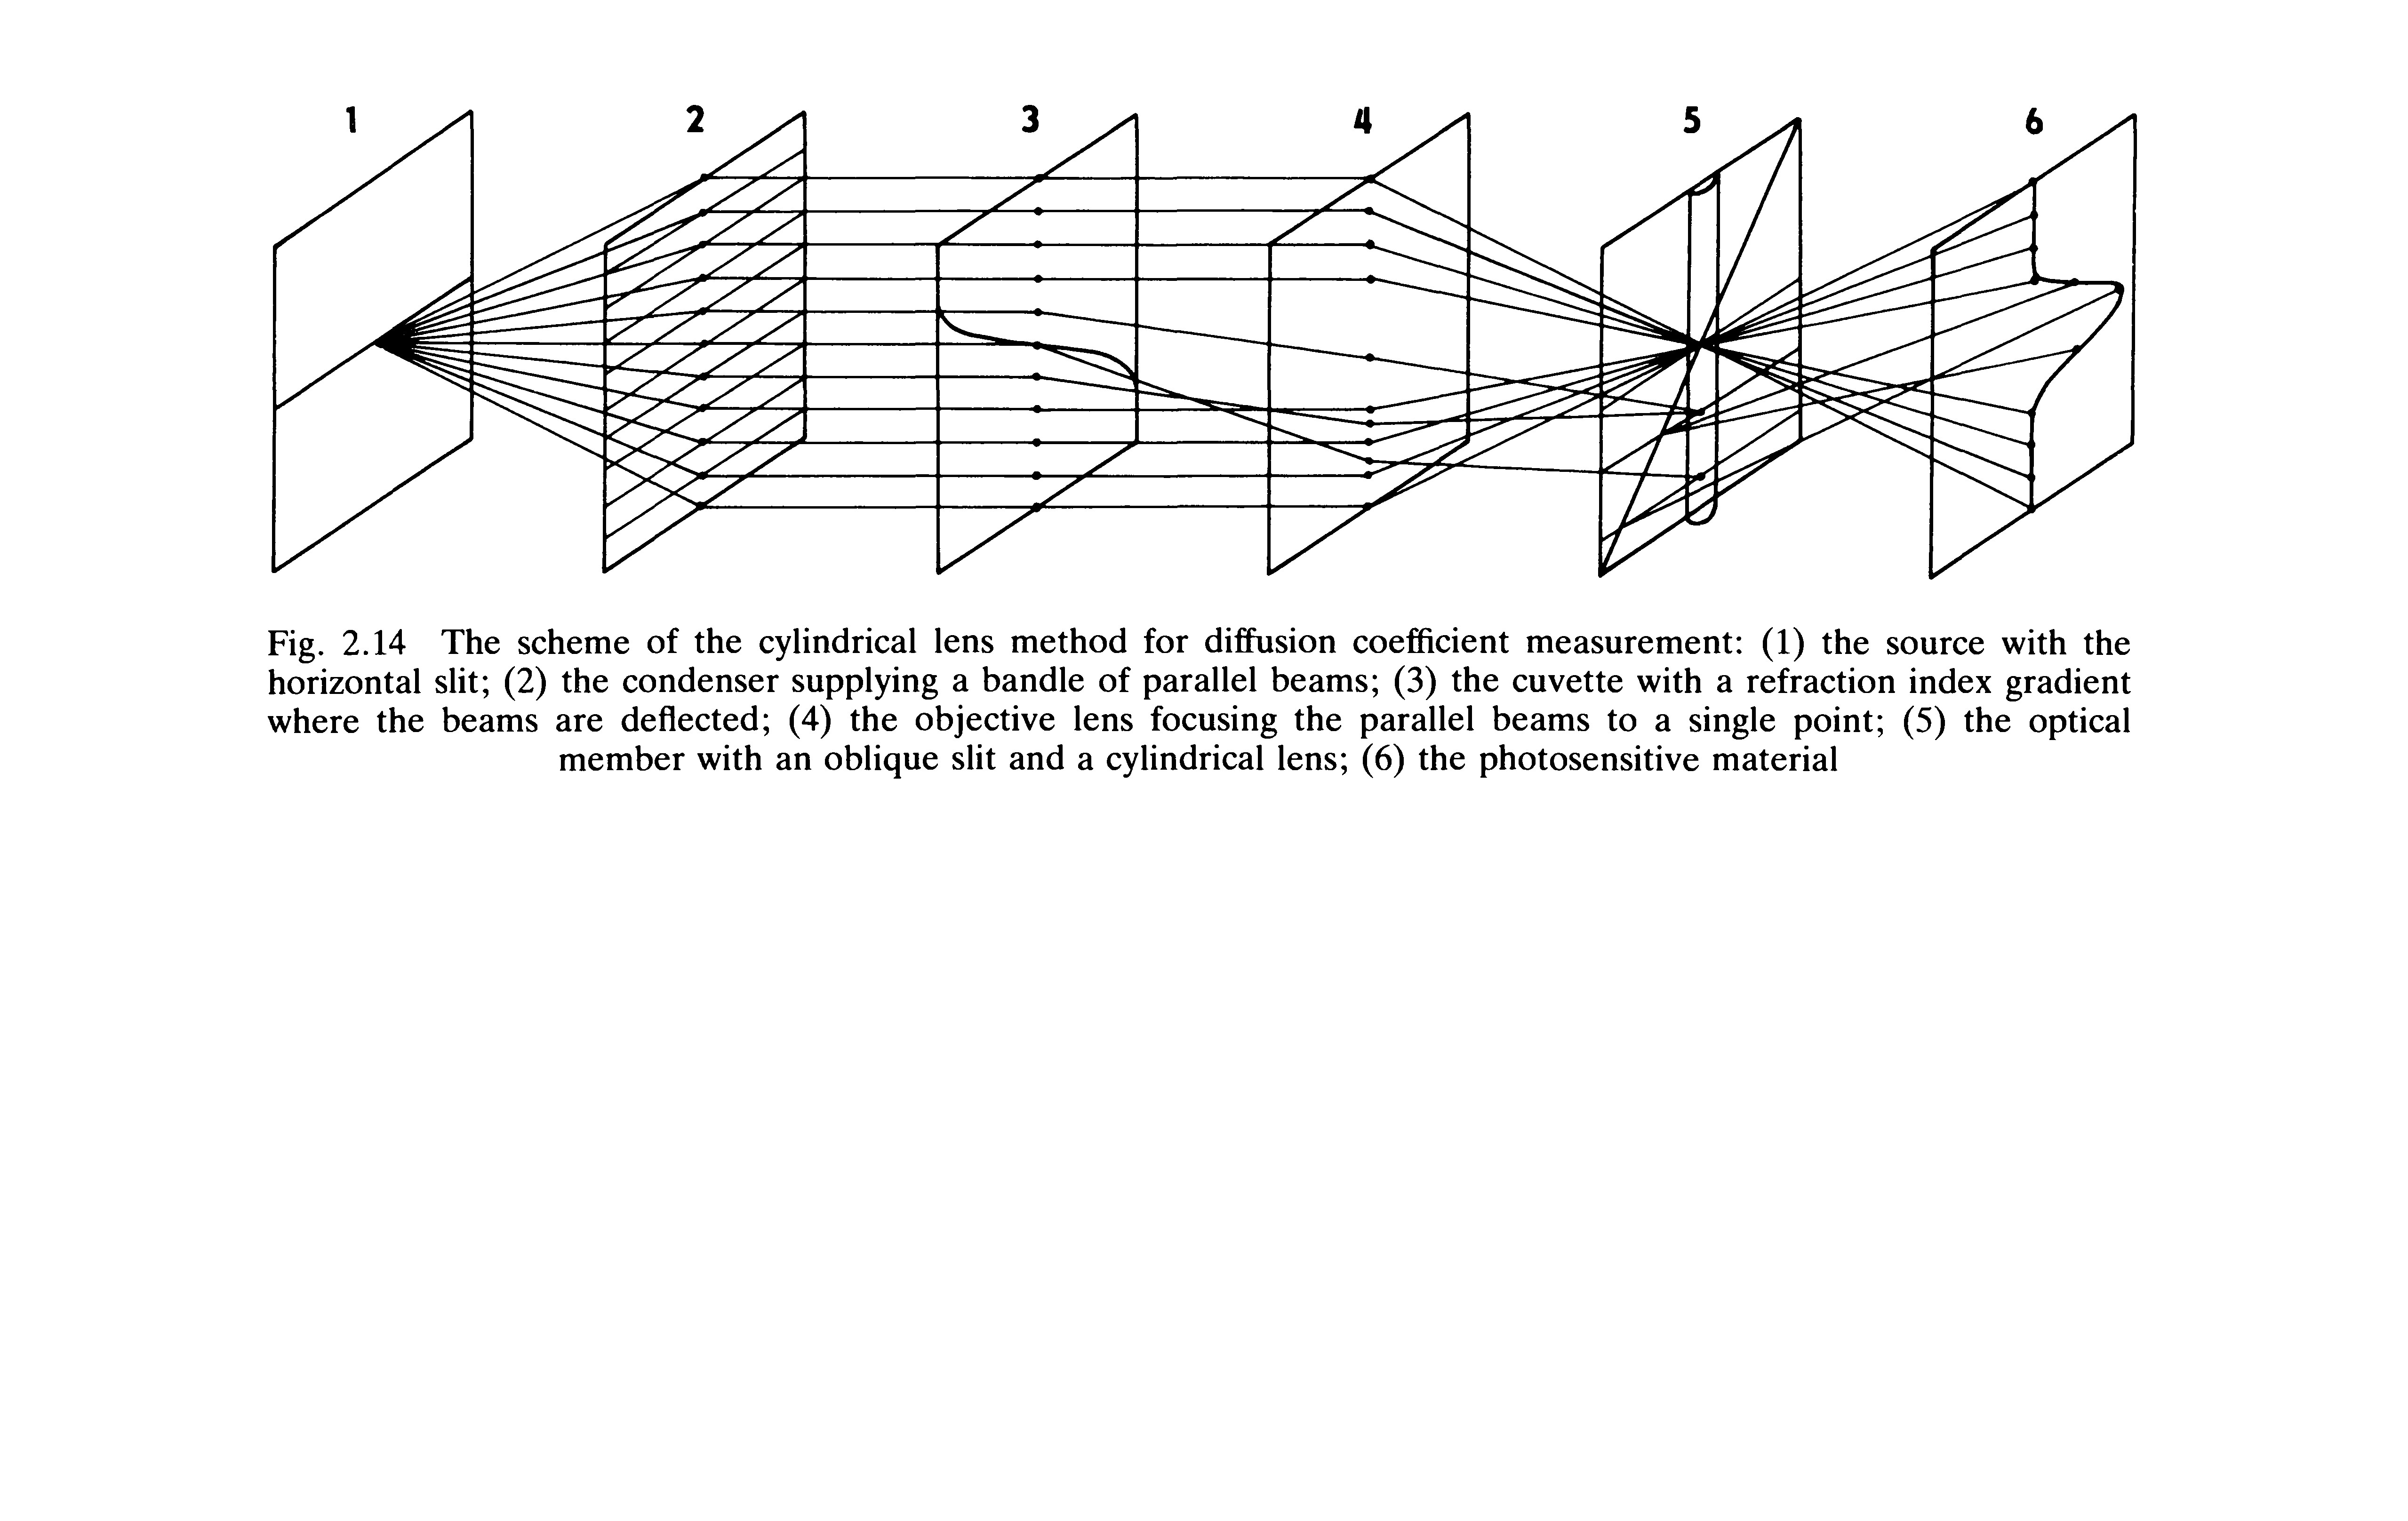 Fig. 2.14 The scheme of the cylindrical lens method for diffusion coefficient measurement (1) the source with the horizontal slit (2) the condenser supplying a handle of parallel beams (3) the cuvette with a refraction index gradient where the beams are deflected (4) the objective lens focusing the parallel beams to a single point (5) the optical member with an oblique slit and a cylindrical lens (6) the photosensitive material...